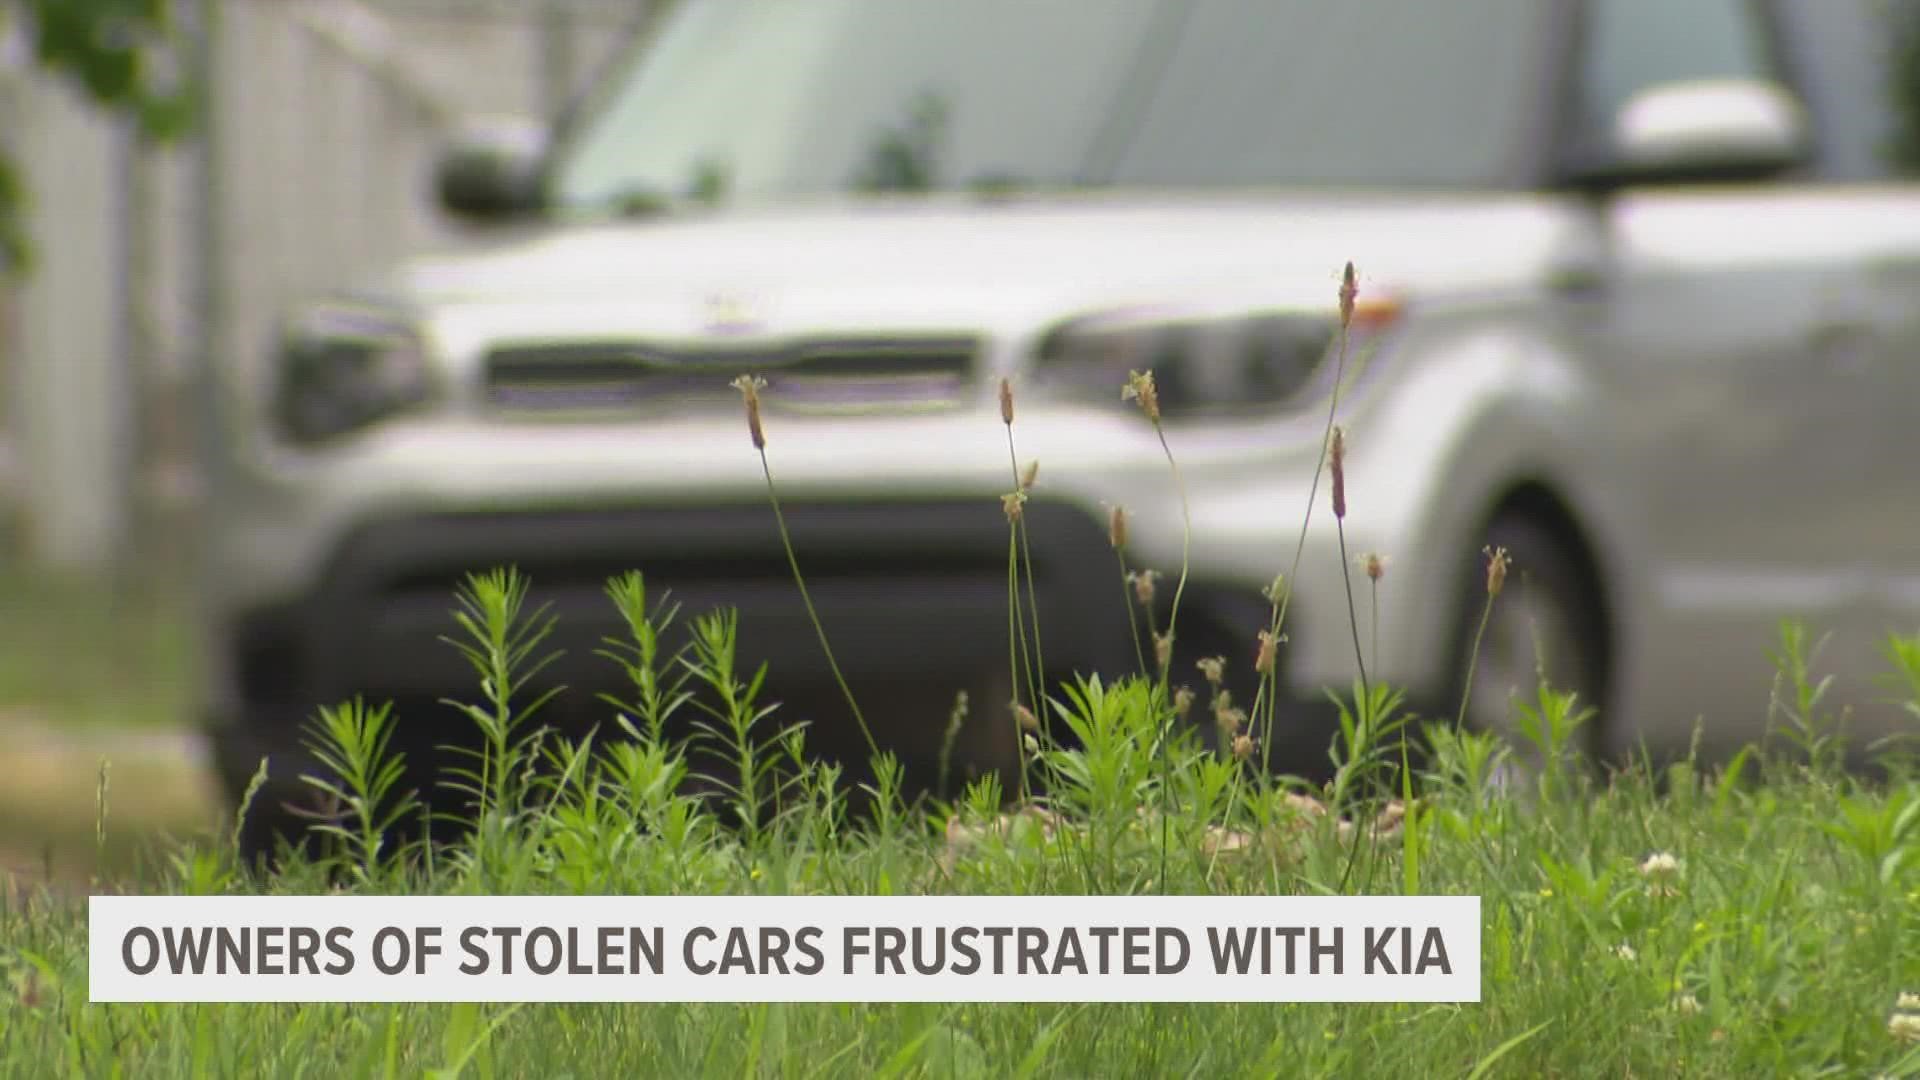 Police say there's been about 600 thefts and attempted thefts of Kia and Hyundai vehicles in Grand Rapids since May 1. The automakers are now offering a fix.